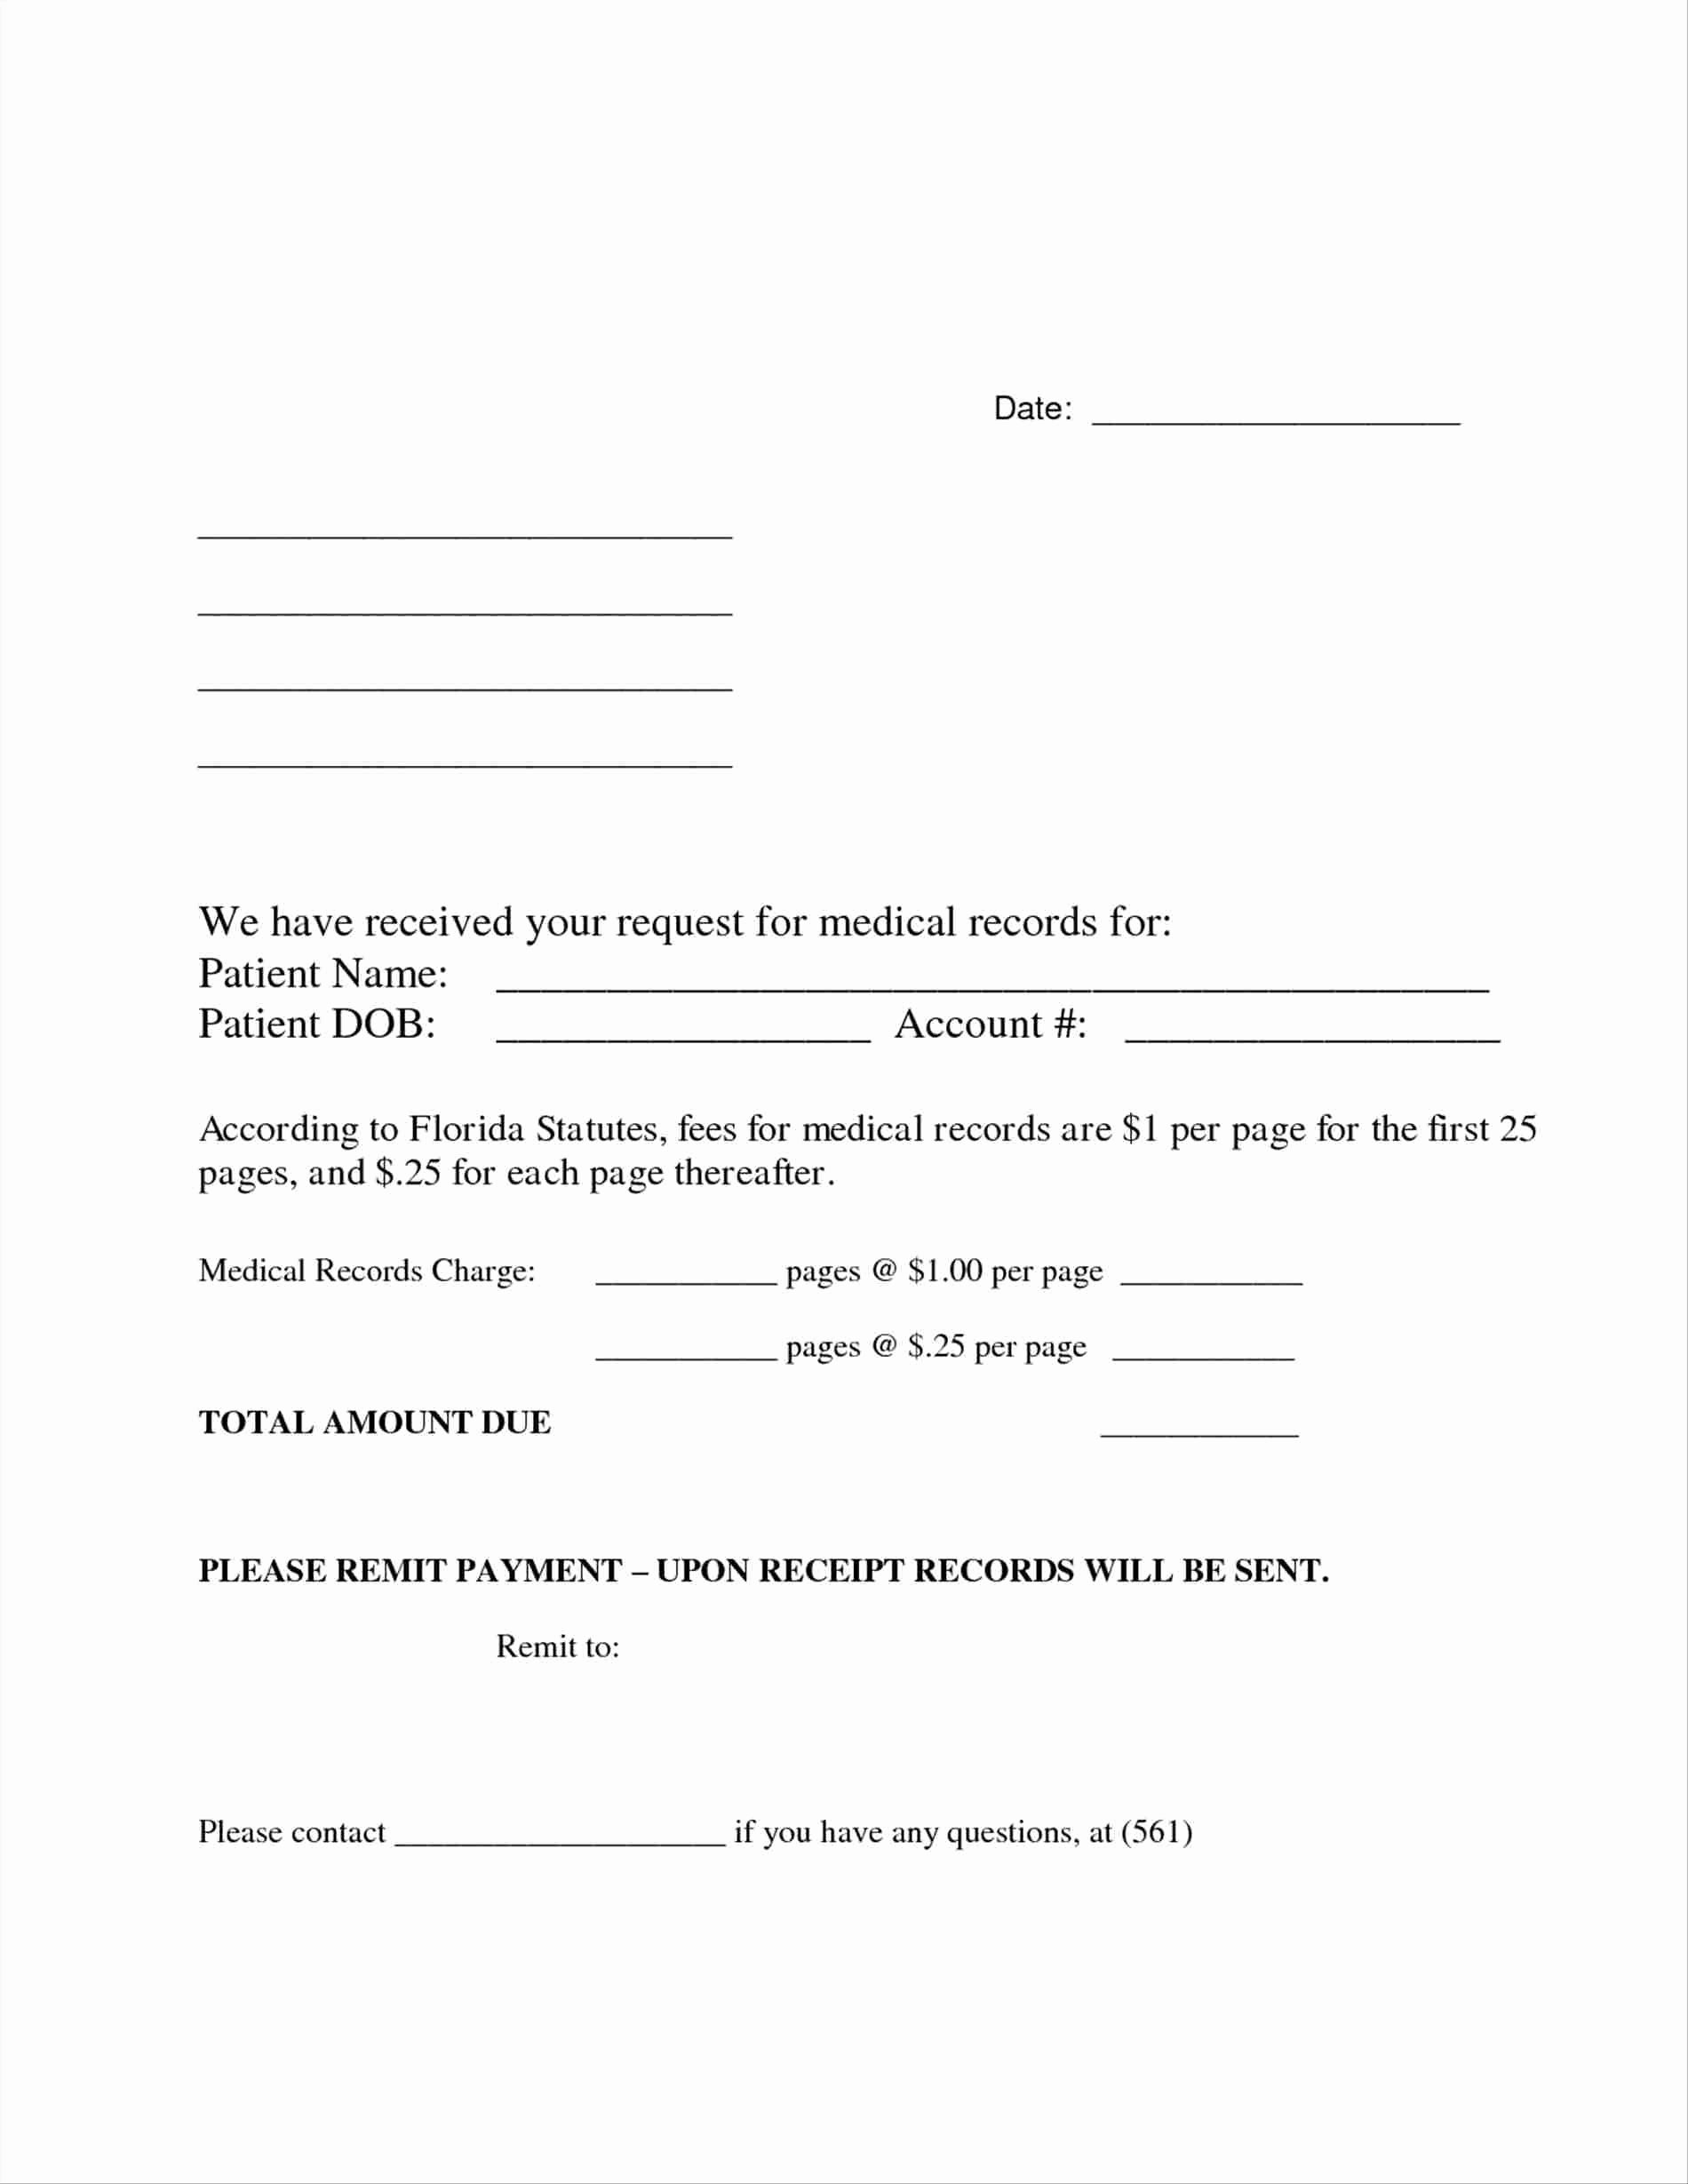 Medical Records Request form Template Awesome 12 13 Requesting Medical Records Letter